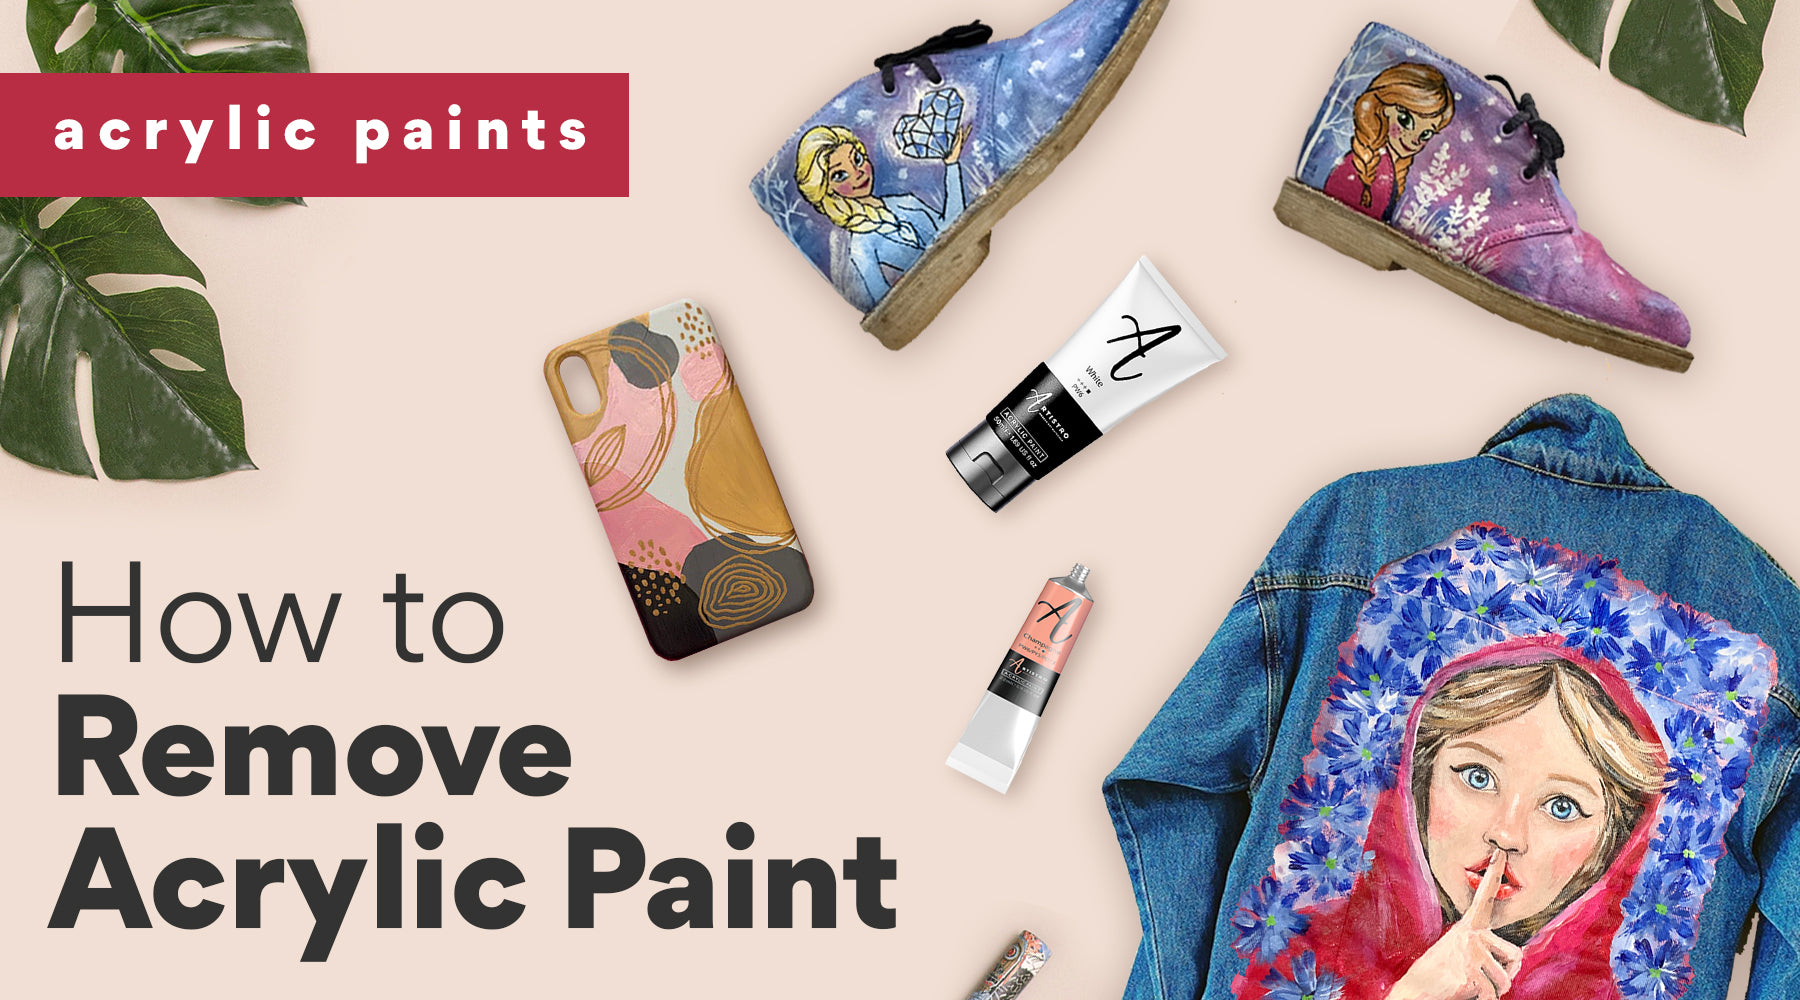 How to Remove Acrylic Paint from Artist Canvas - iFixit Repair Guide